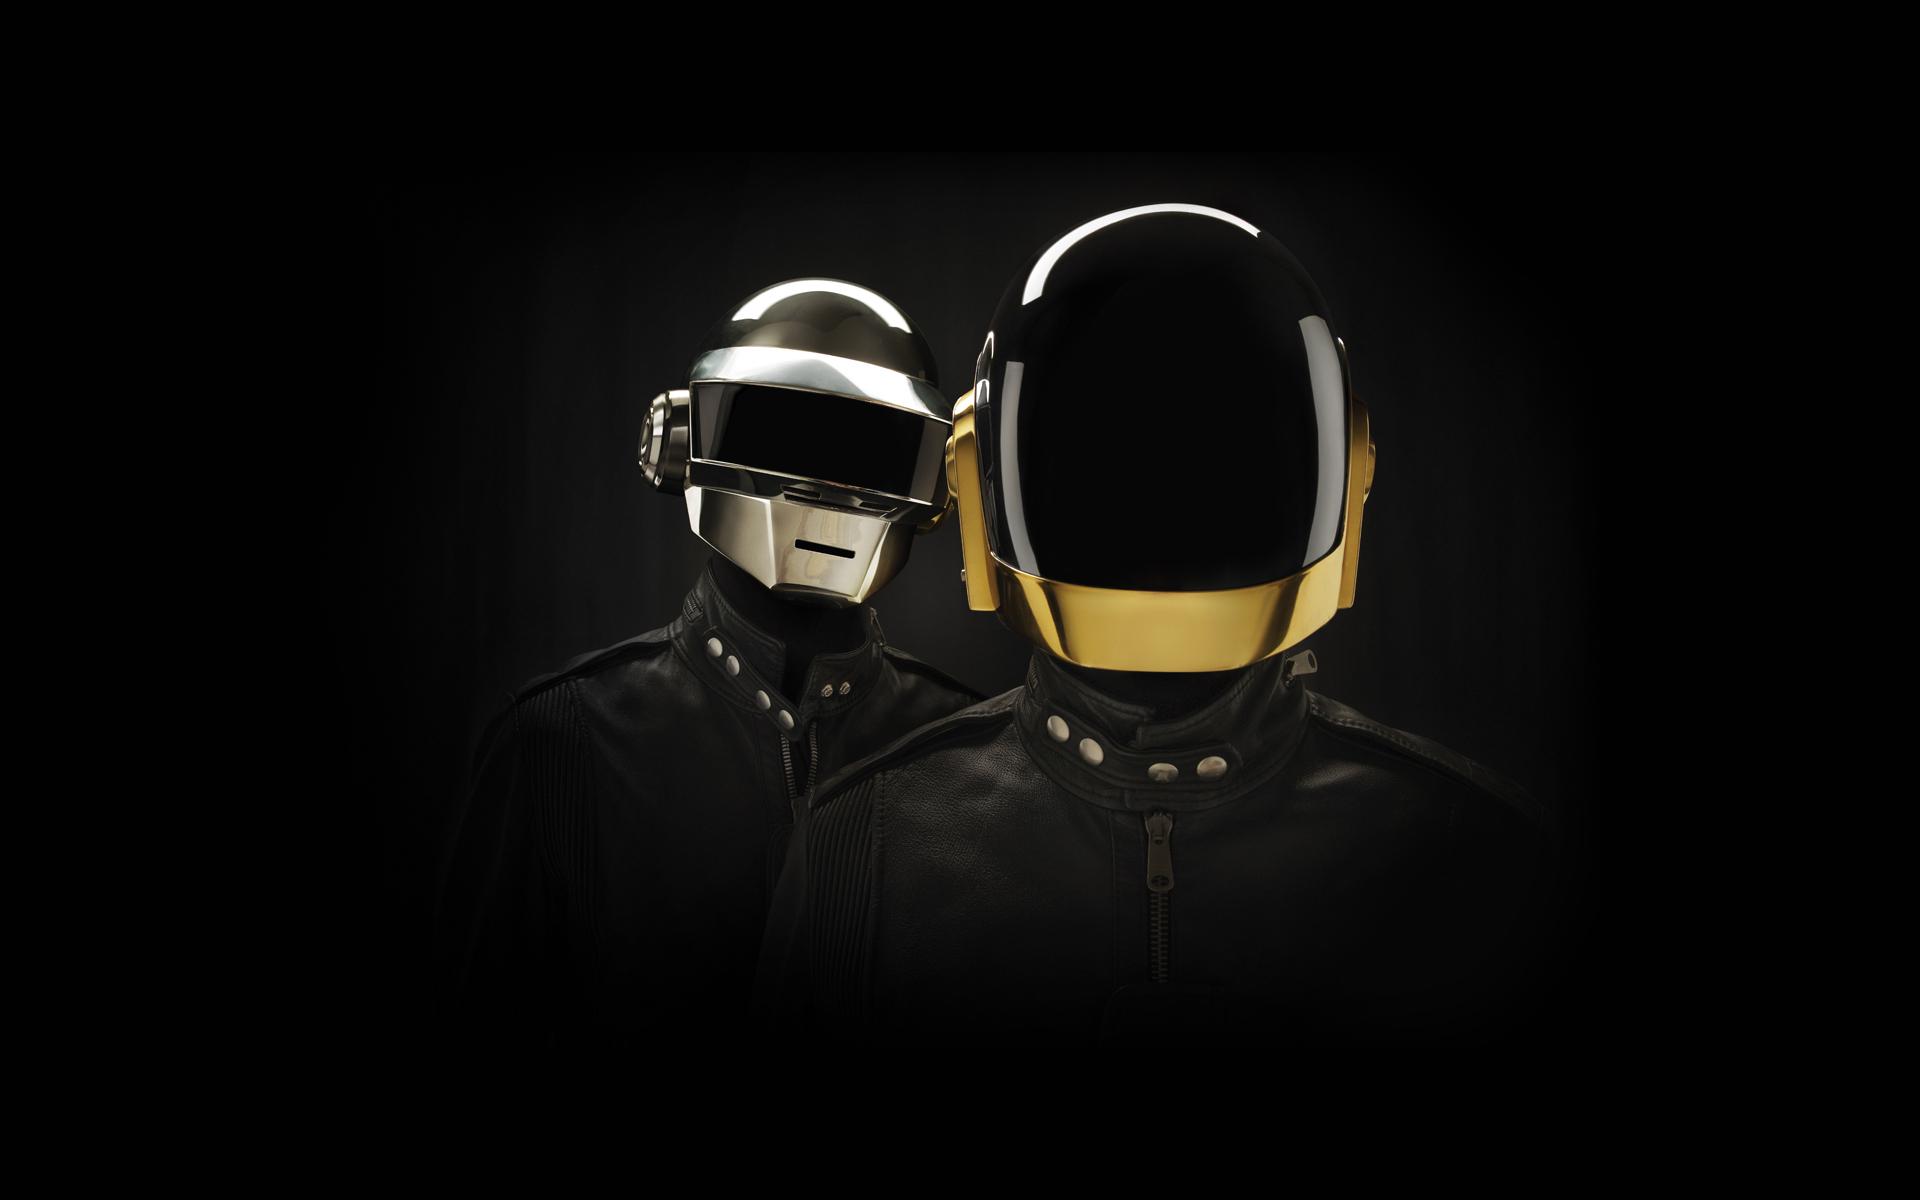 Daft Punk wallpaper and image wallpaper, picture, photo. SONG